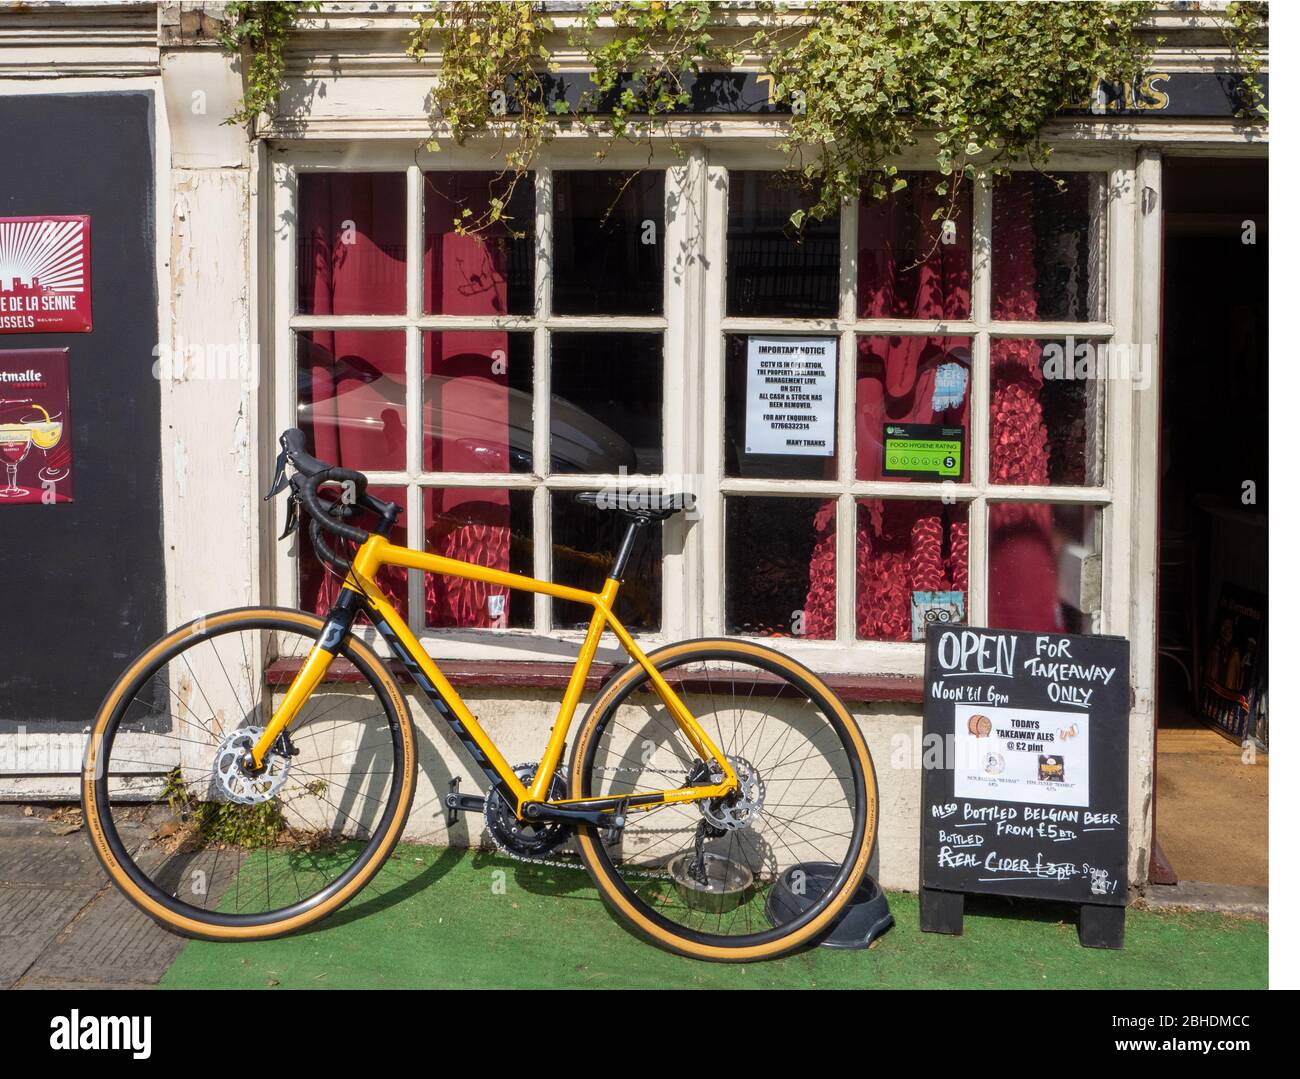 Bicycle parked outside the Portcullis a local pub in Clifton village Bristol selling takeaway beers during the 2020 Coronavirus pandemic lockdown Stock Photo